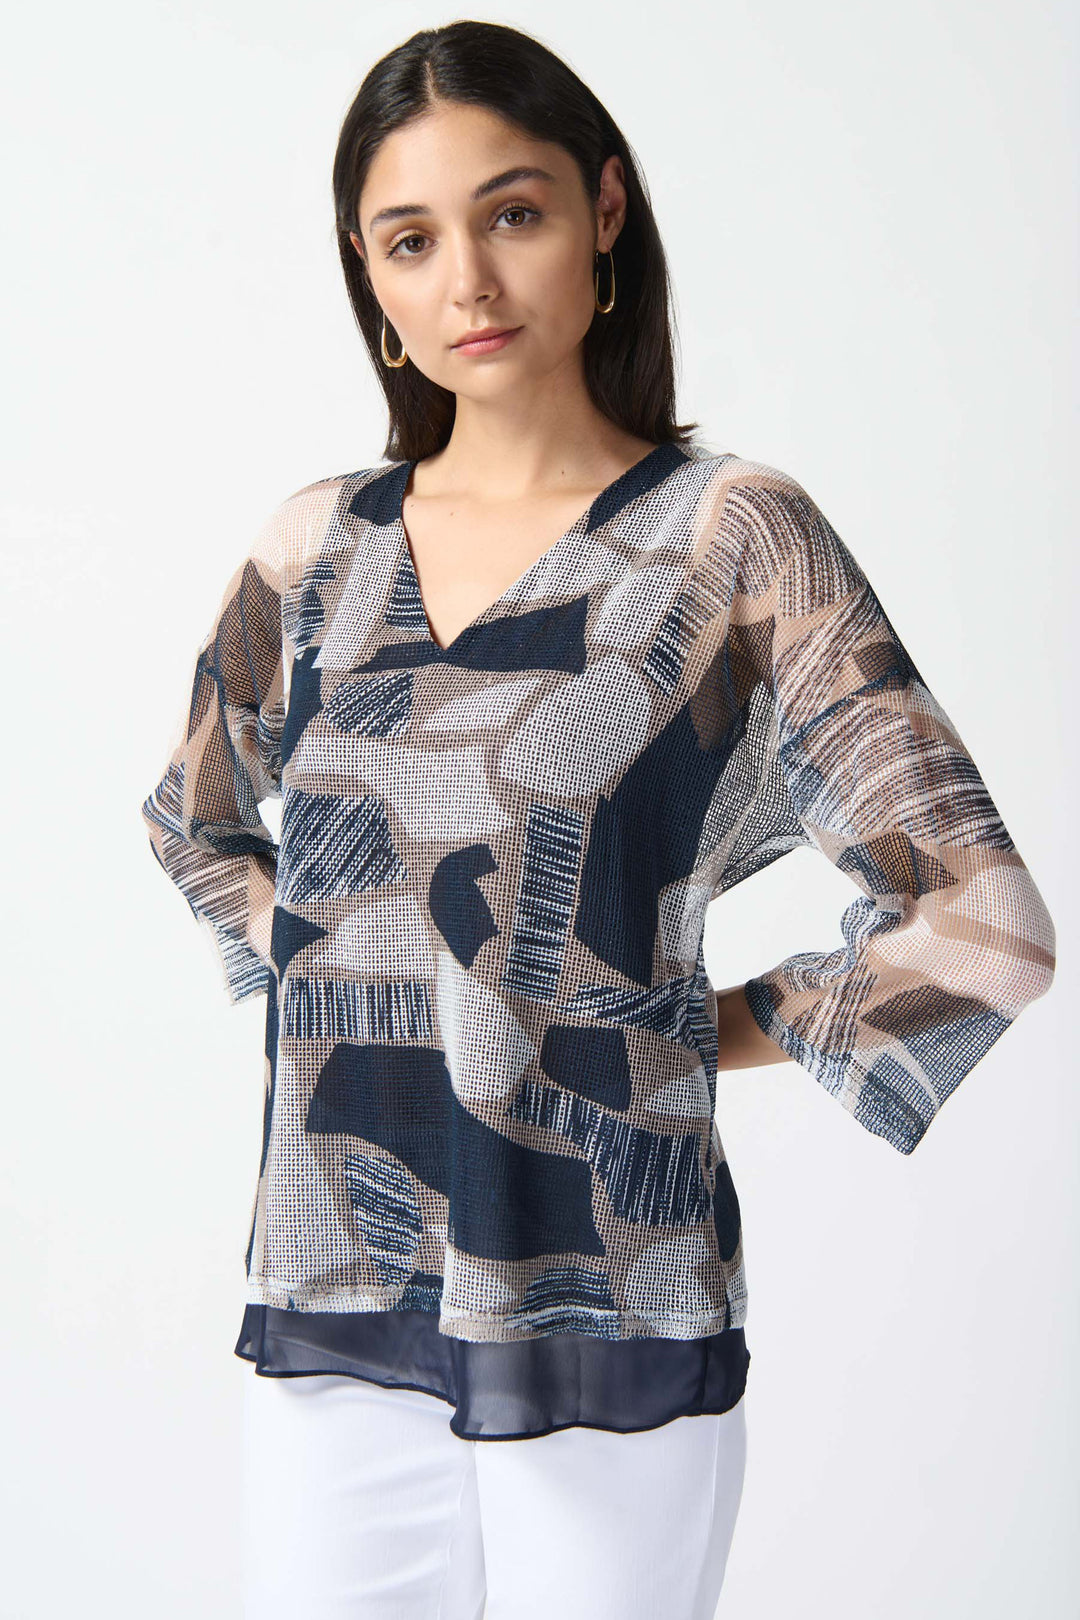 JOSEPH RIBKOFF Spring 2024 With a sleek silhouette and smart v-neck, this top effortlessly combines style and comfort.